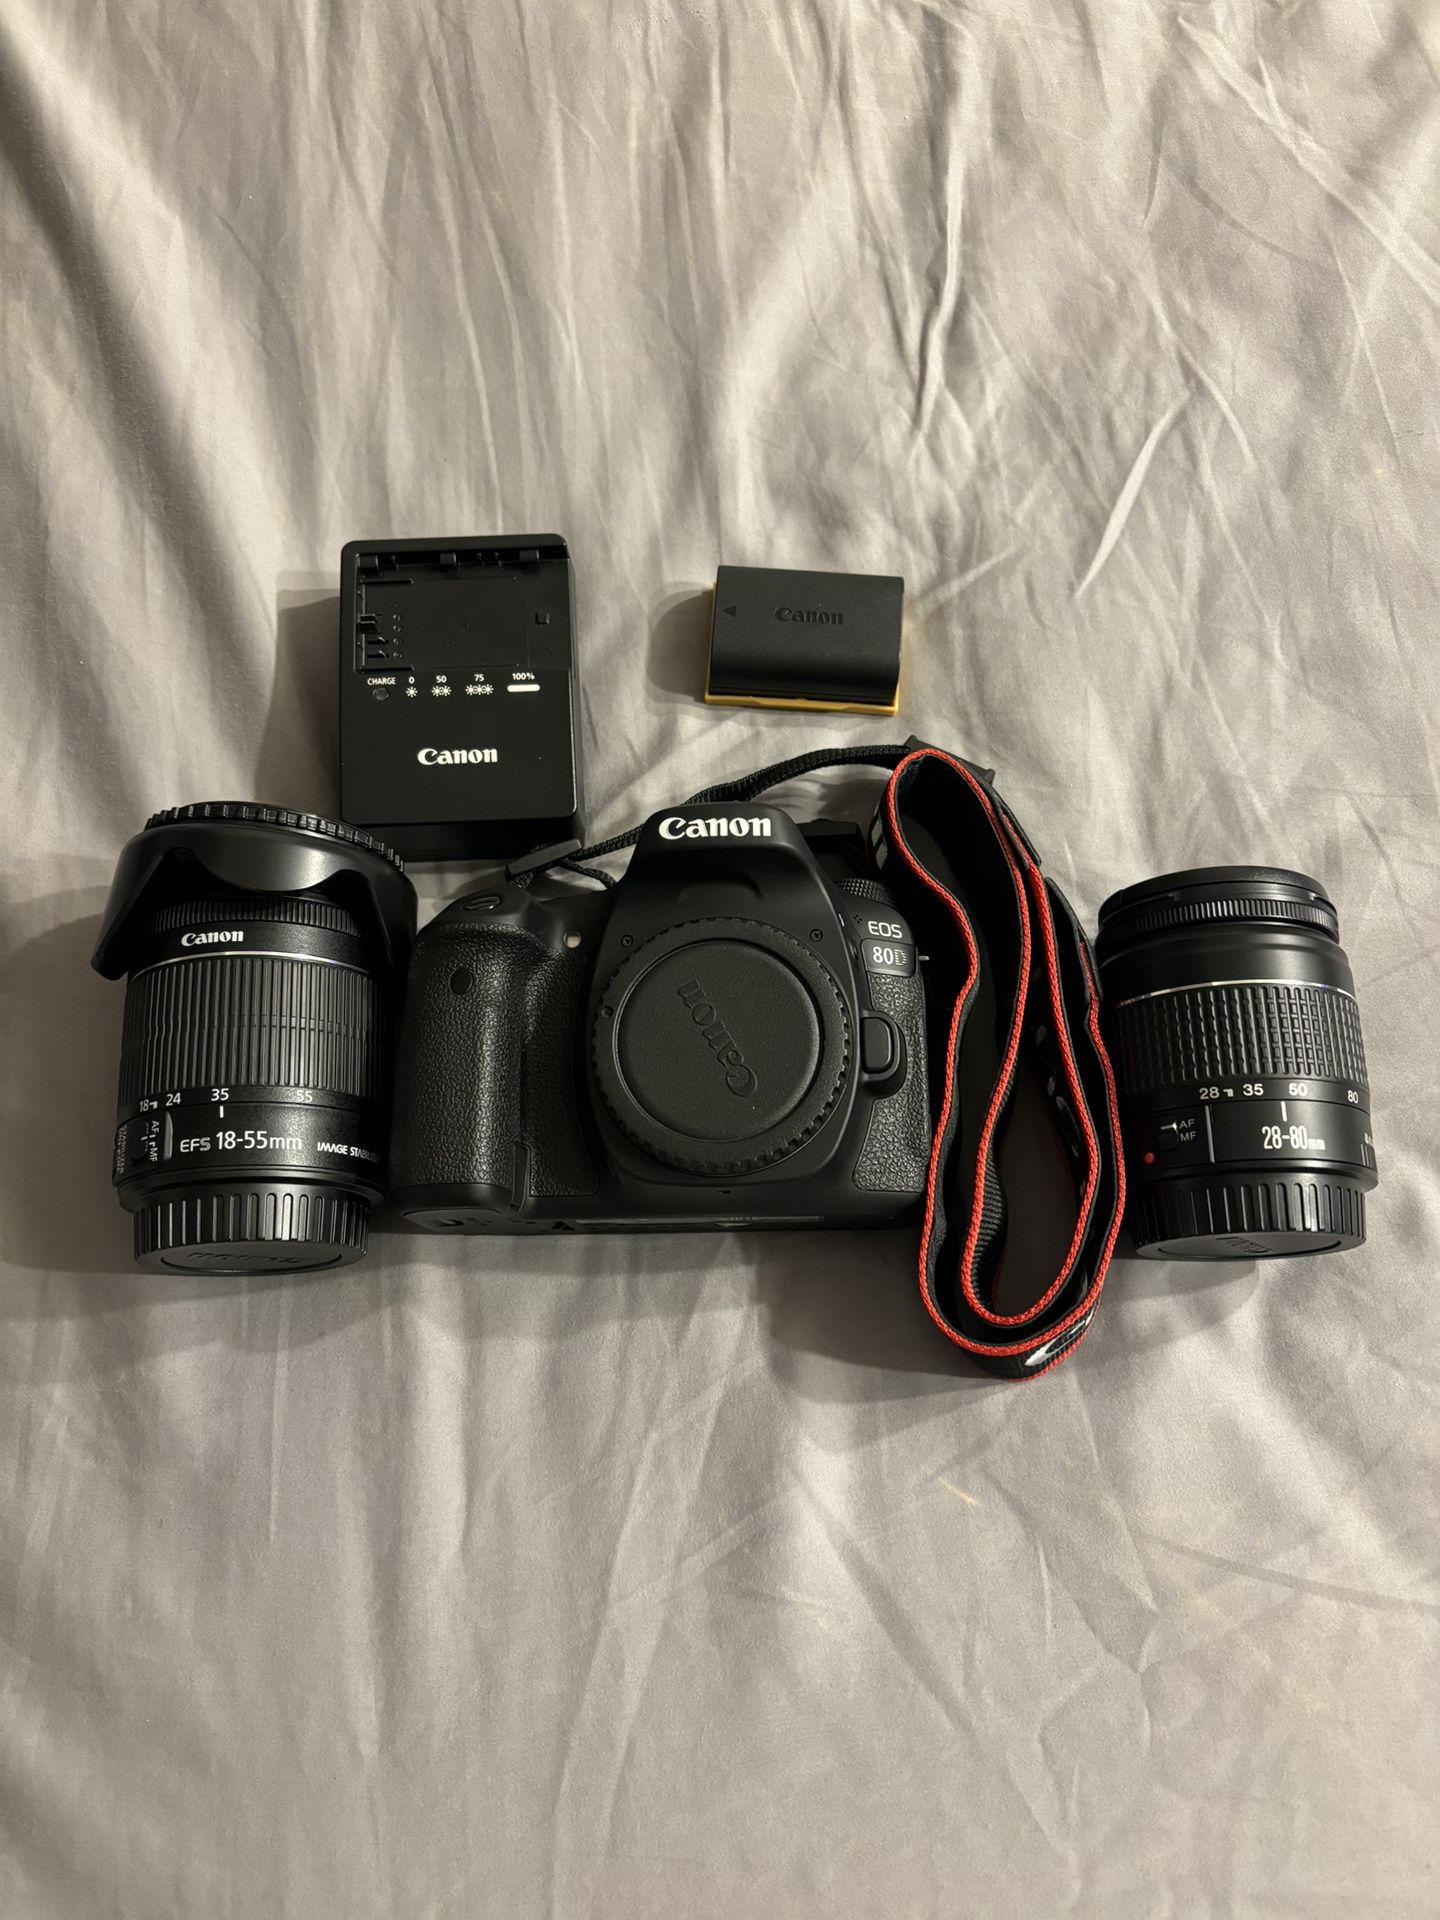 Canon 80d 18-55mm and 28-80mm lens